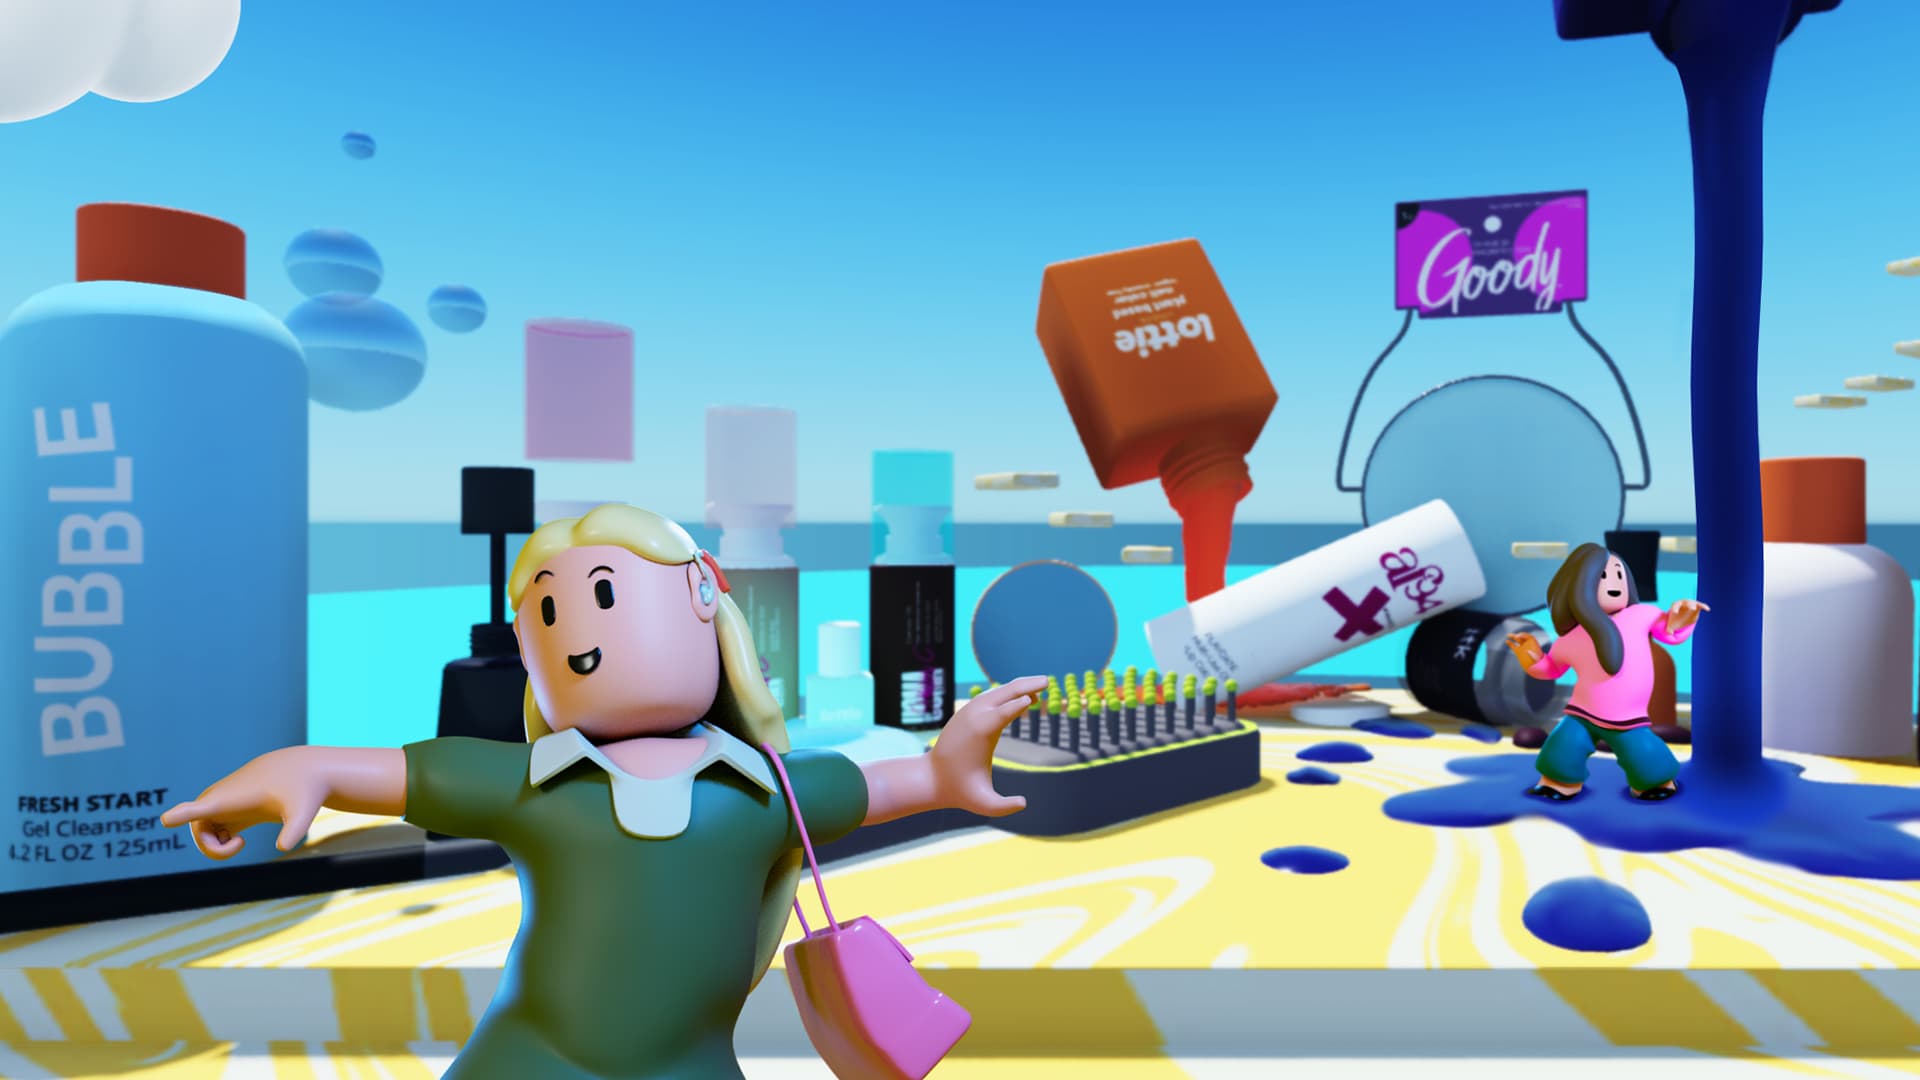 Walmart enters the metaverse with Roblox experiences aimed at younger shoppers